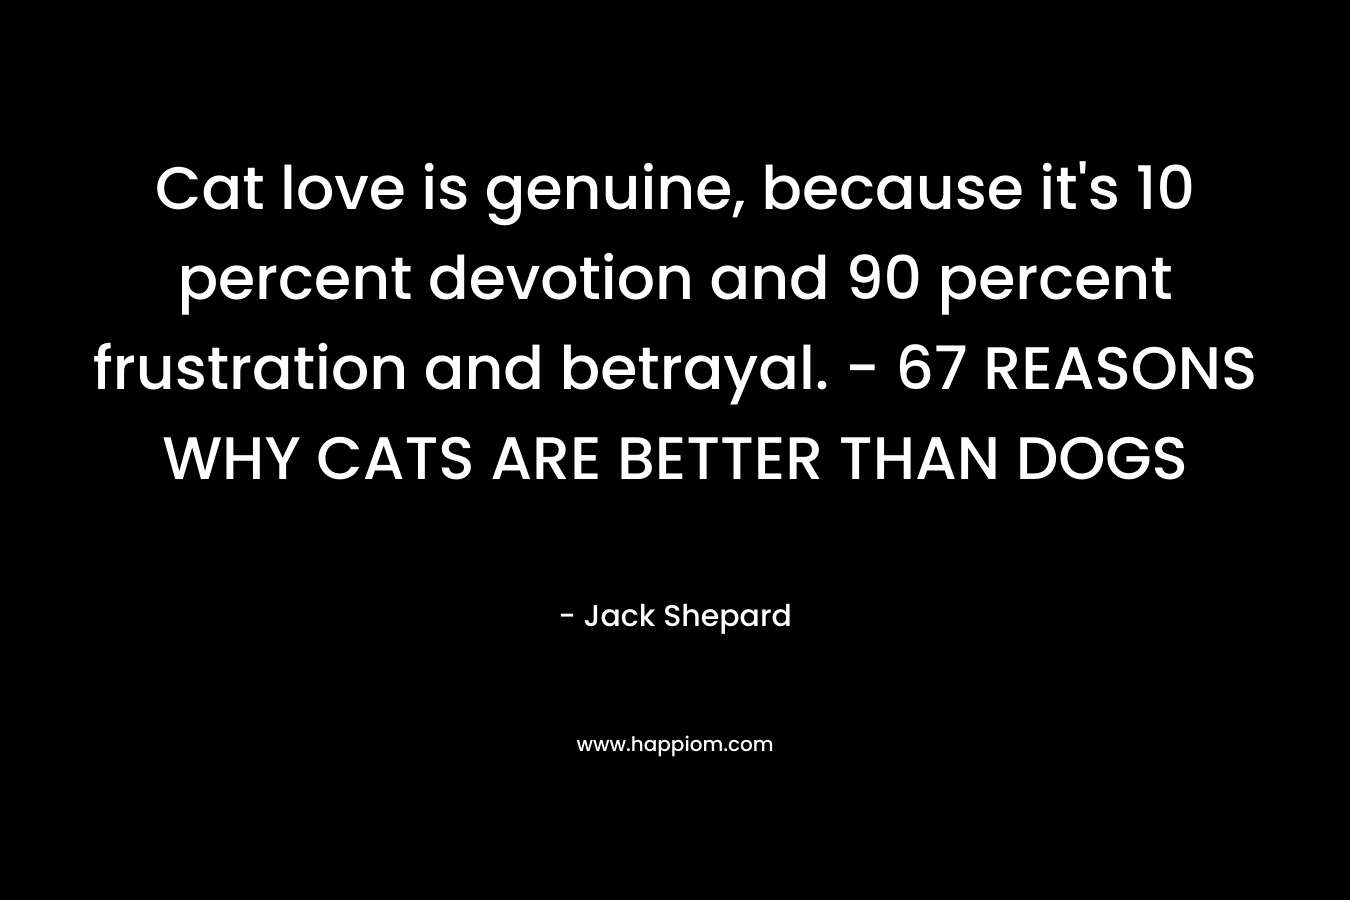 Cat love is genuine, because it’s 10 percent devotion and 90 percent frustration and betrayal. – 67 REASONS WHY CATS ARE BETTER THAN DOGS – Jack Shepard